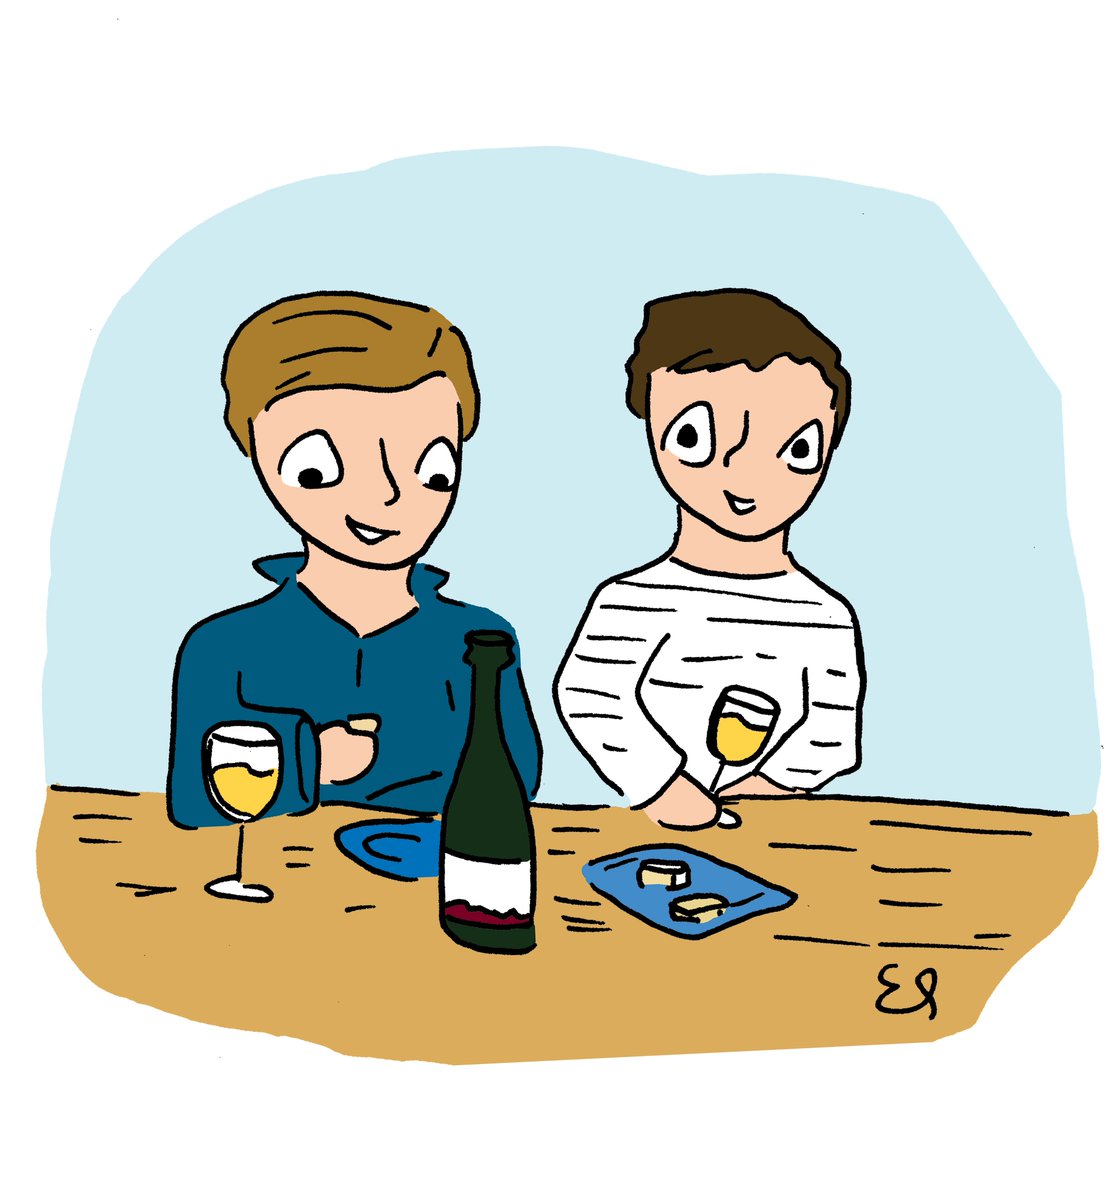 Much love to our pal @PintsandPanels who has immortalised @PellicleJonny and I in cartoon form. It's just like the video for Take On Me only way cuter, and with booze.